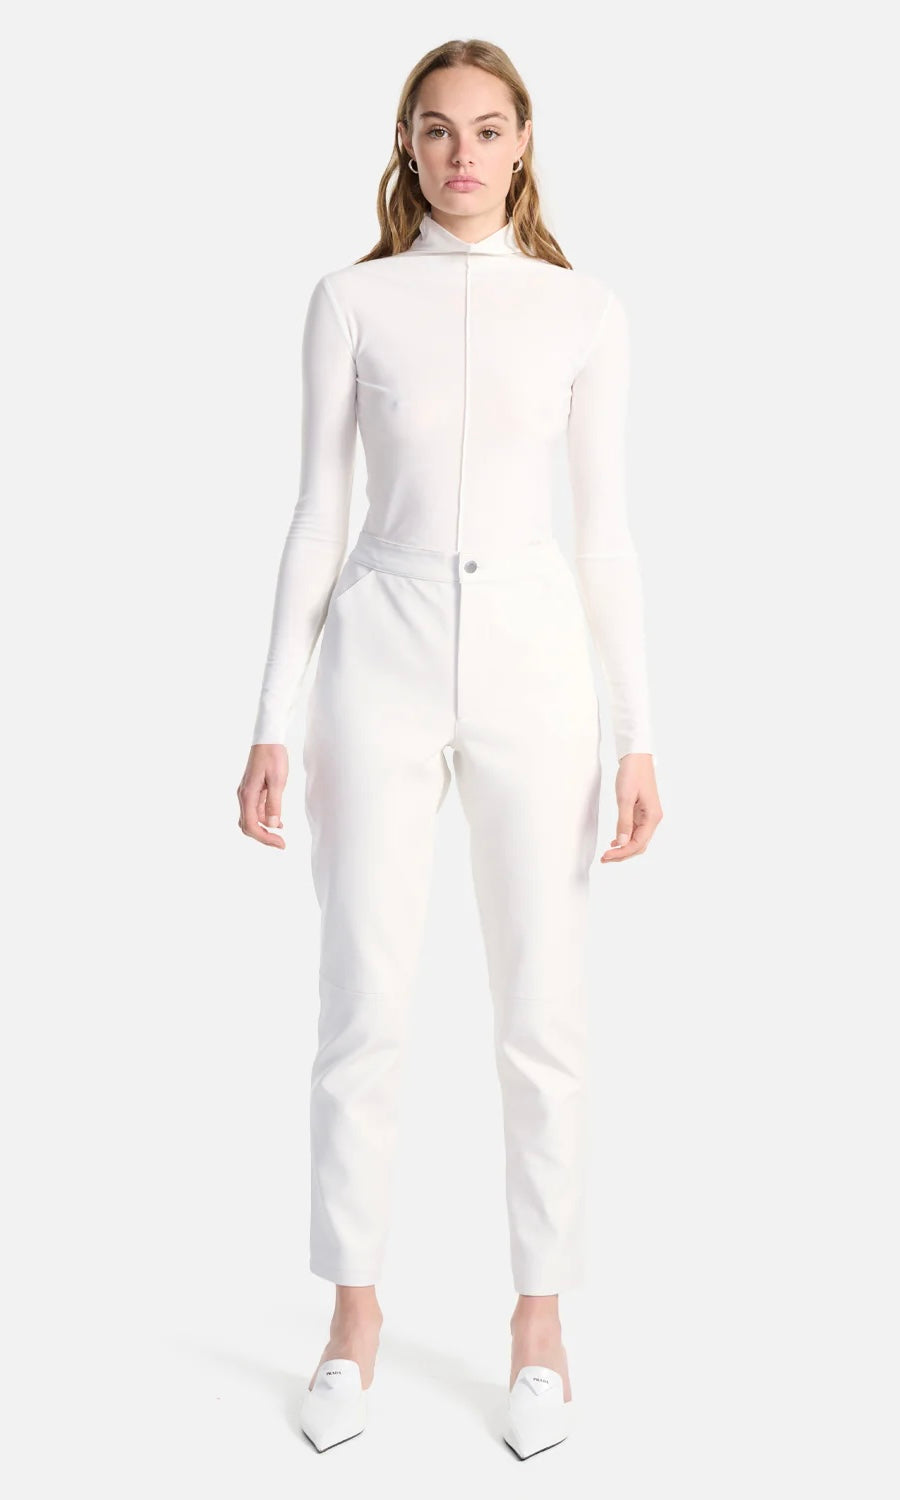 Ena Pelly Ava Leather Pant In Vintage White